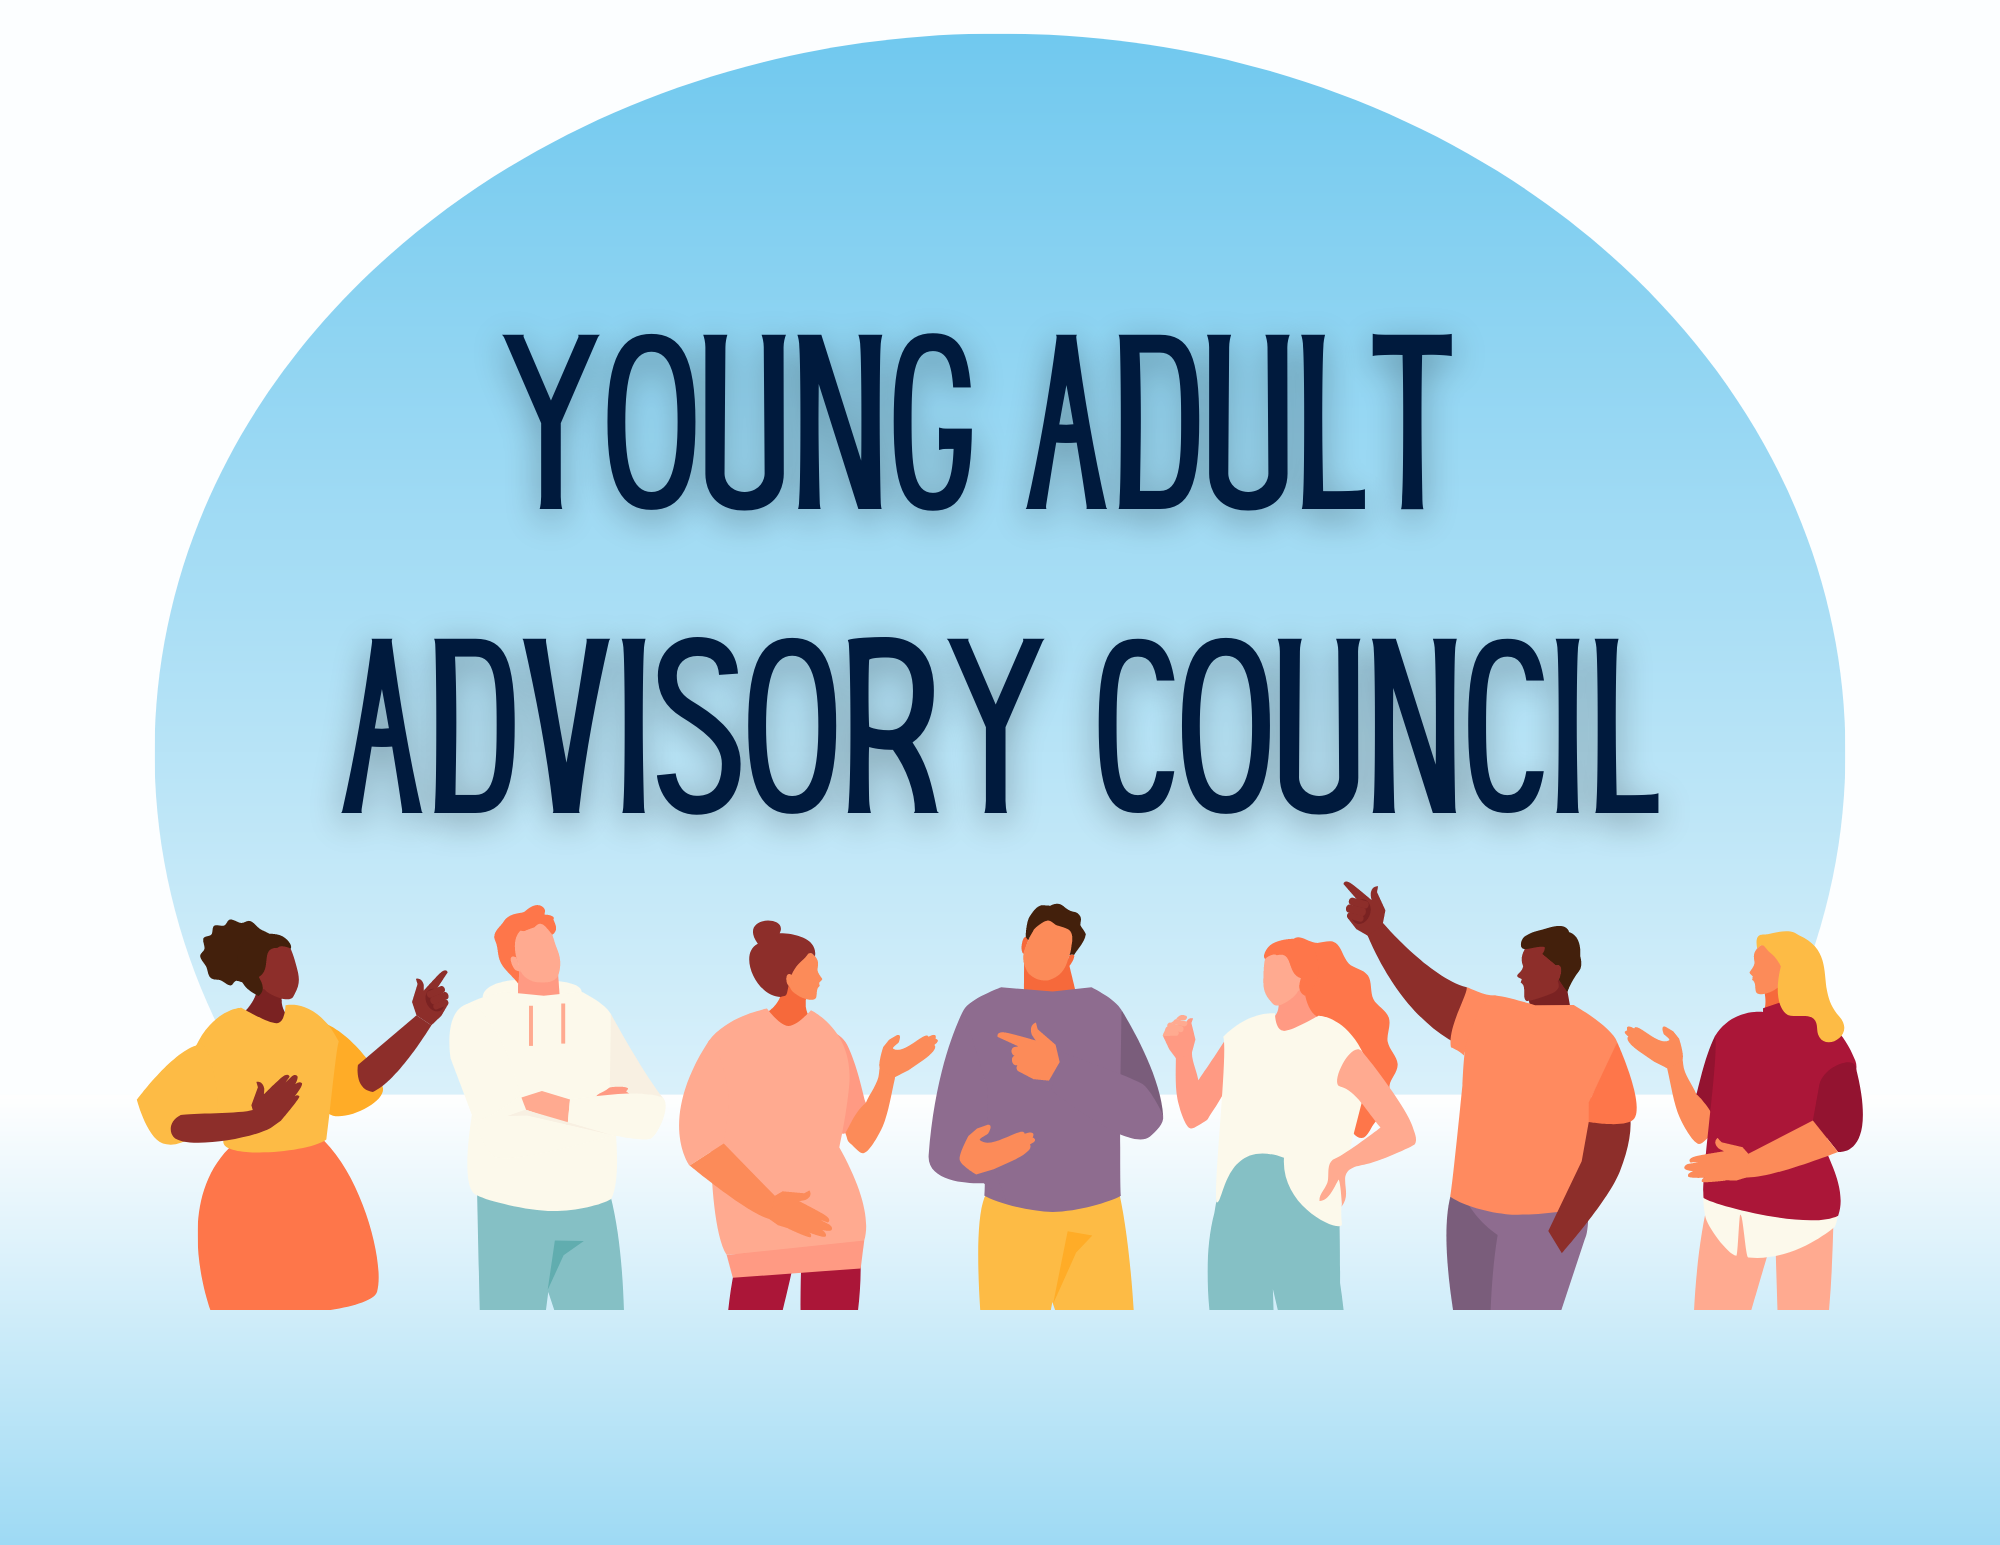 graphic of various figures talking under the text "Young Adult Advisory Council"